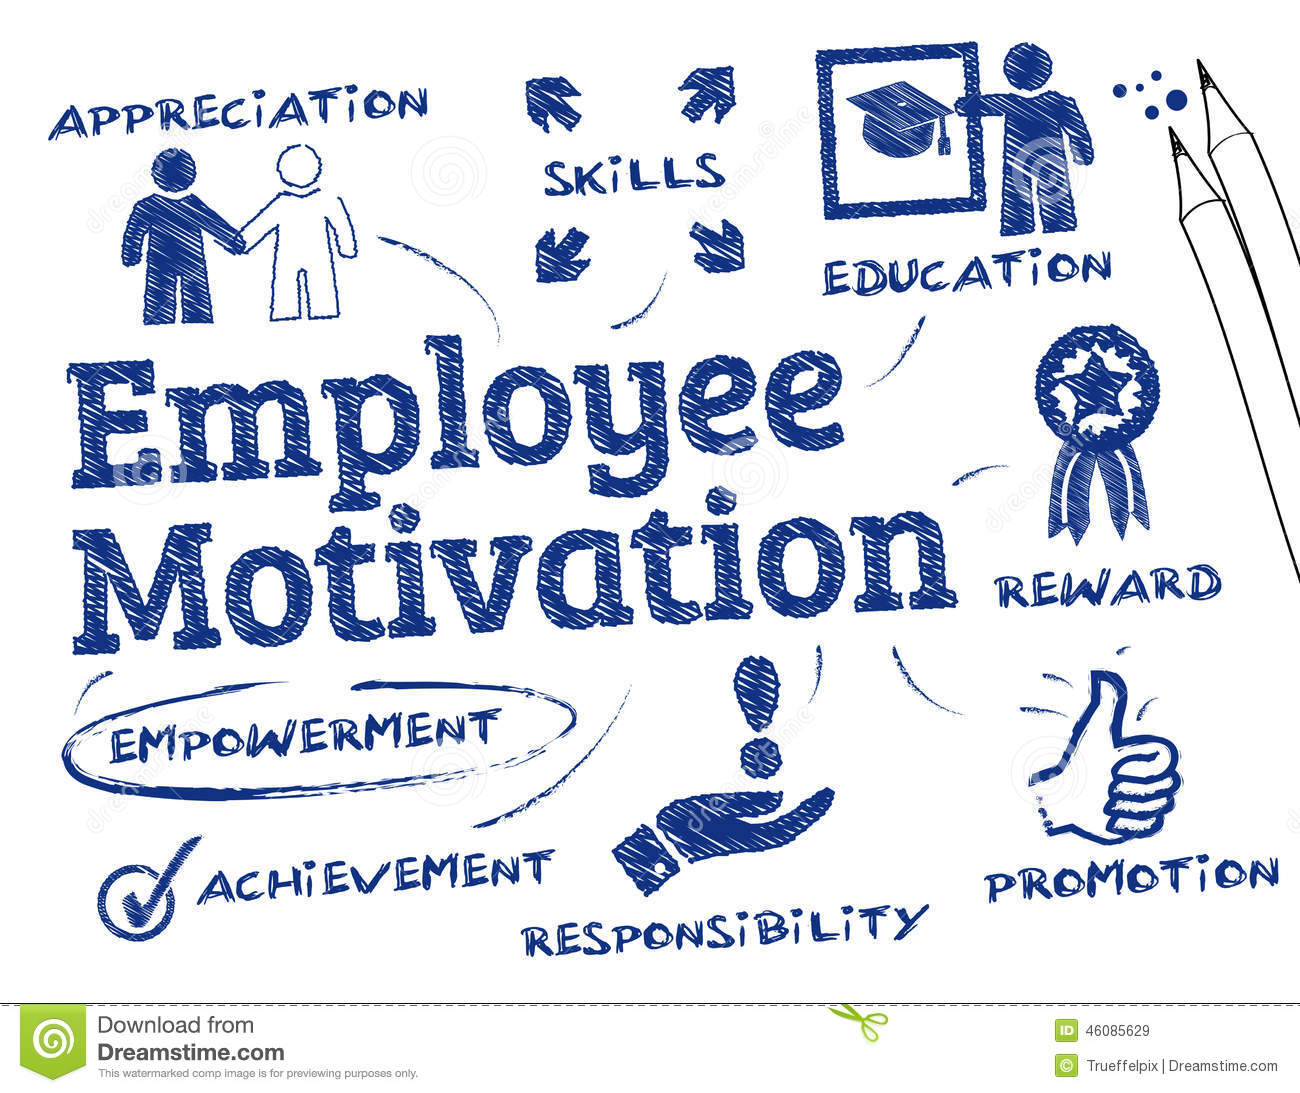 Employee Motivation   Chart With Keywords And Icons 